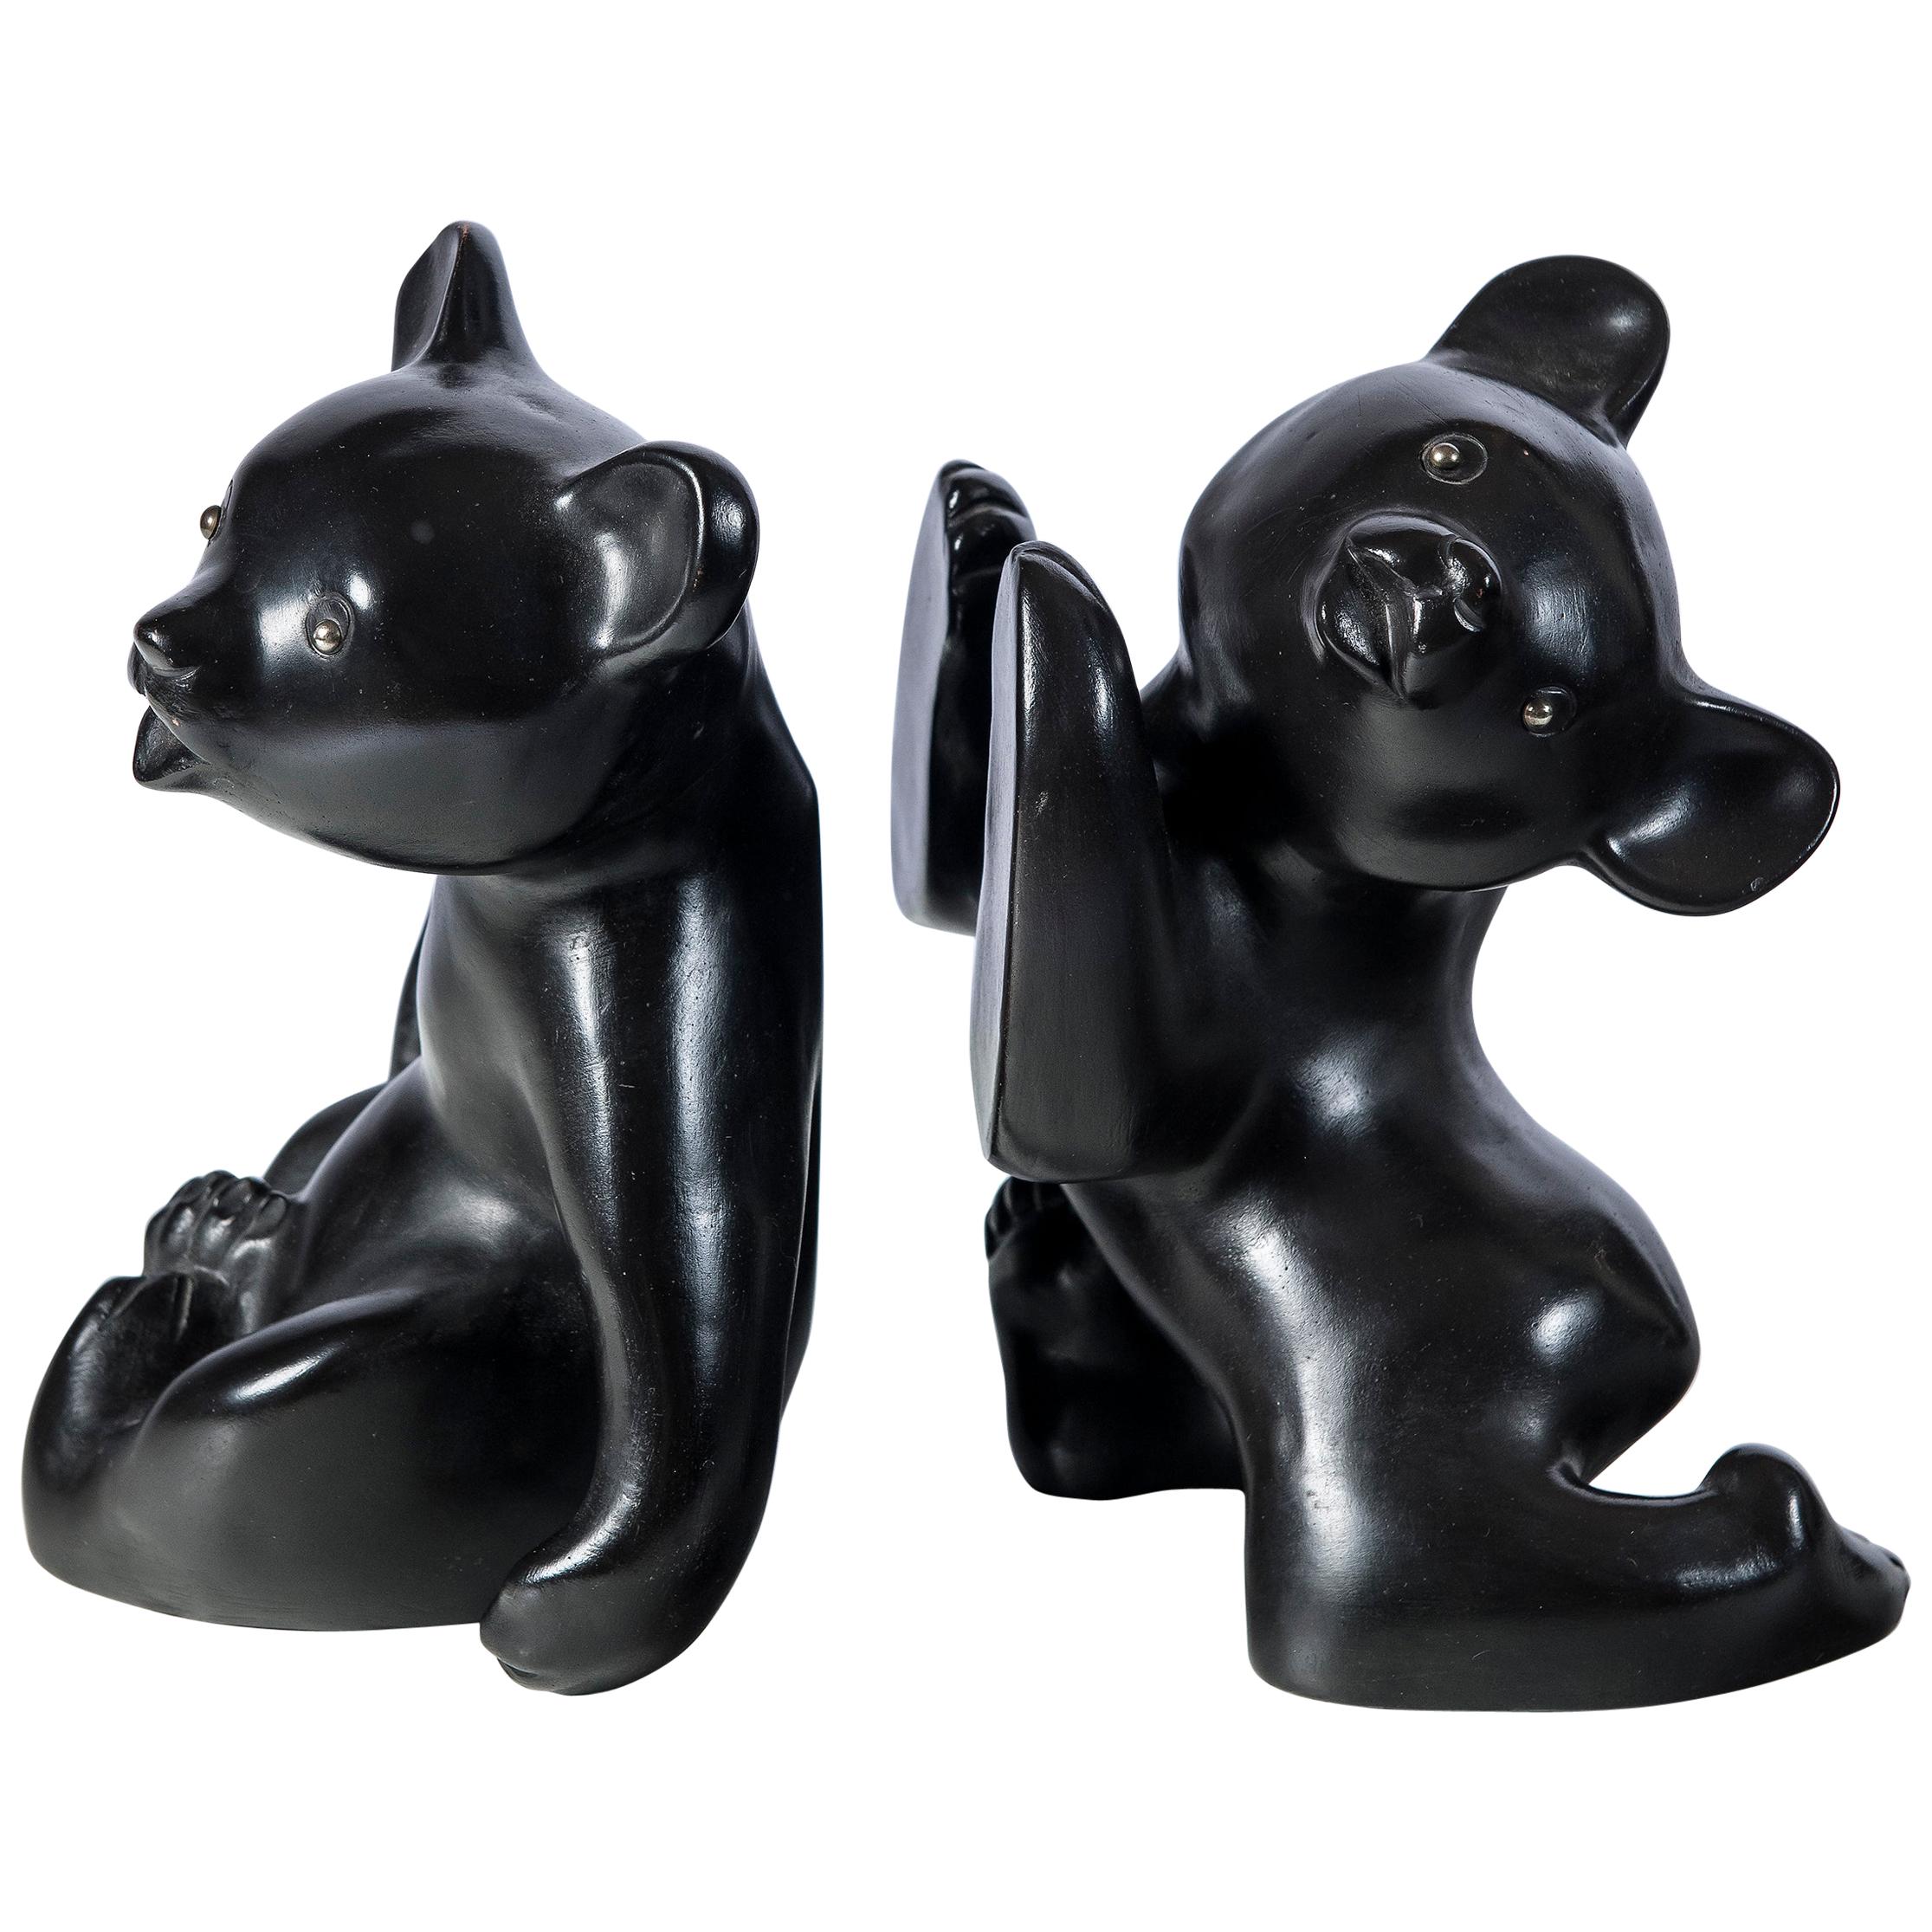 Pair of Ceramic Bears Bookends, Signed Vienna, by Leopold Anzengruber, 1955 For Sale